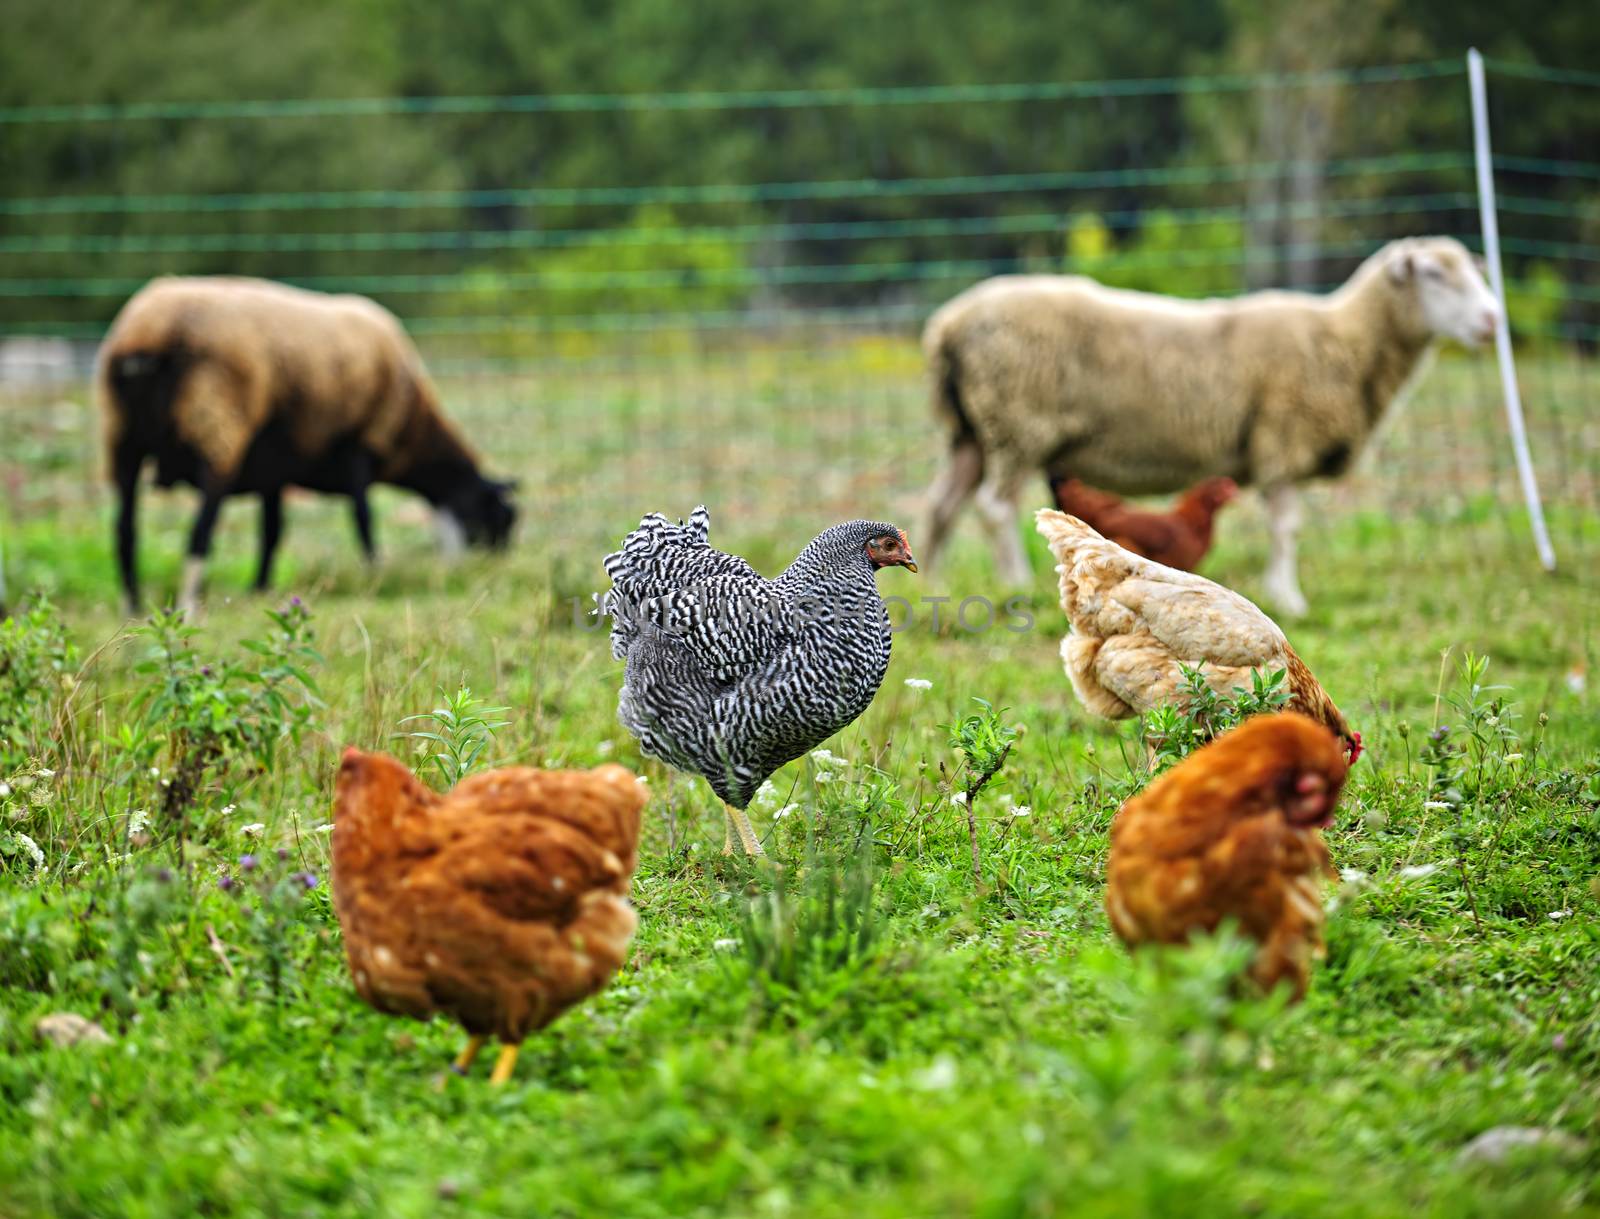 Chickens and sheep grazing on organic farm by elenathewise